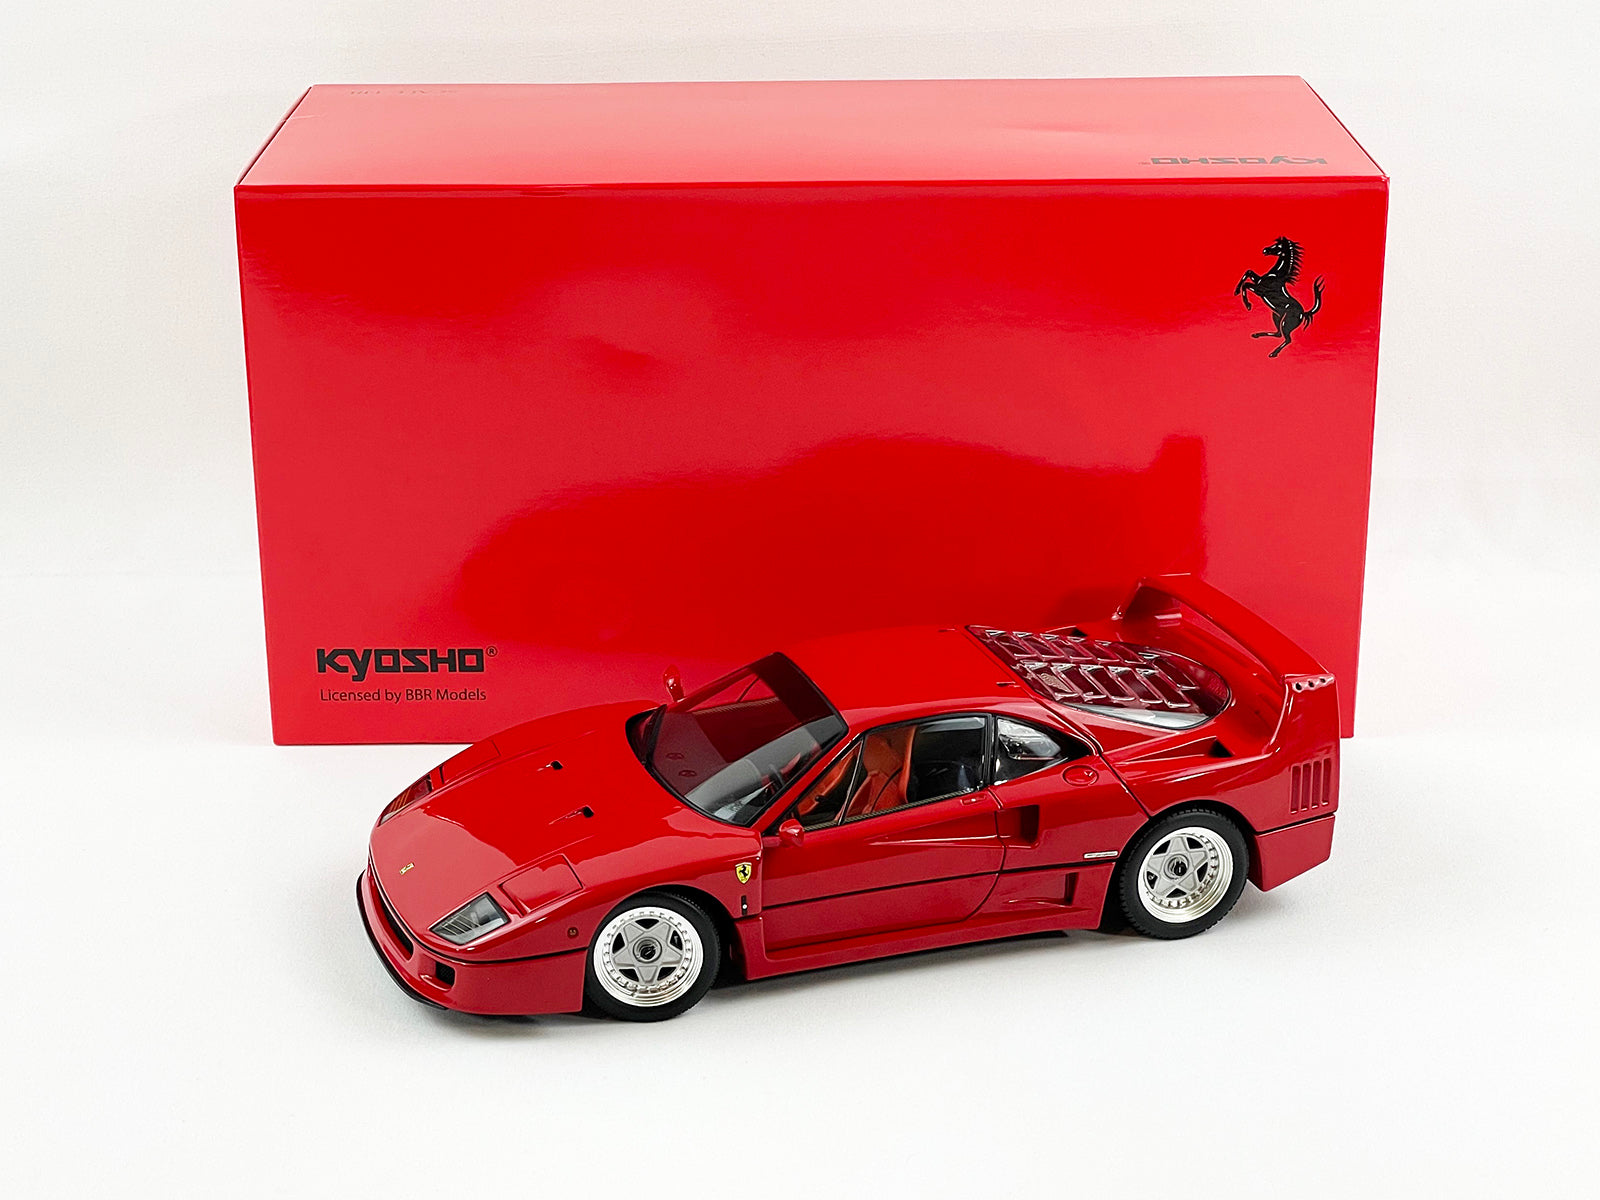 Kyosho 1:43 Sports Cars: OPENING THE BOX 